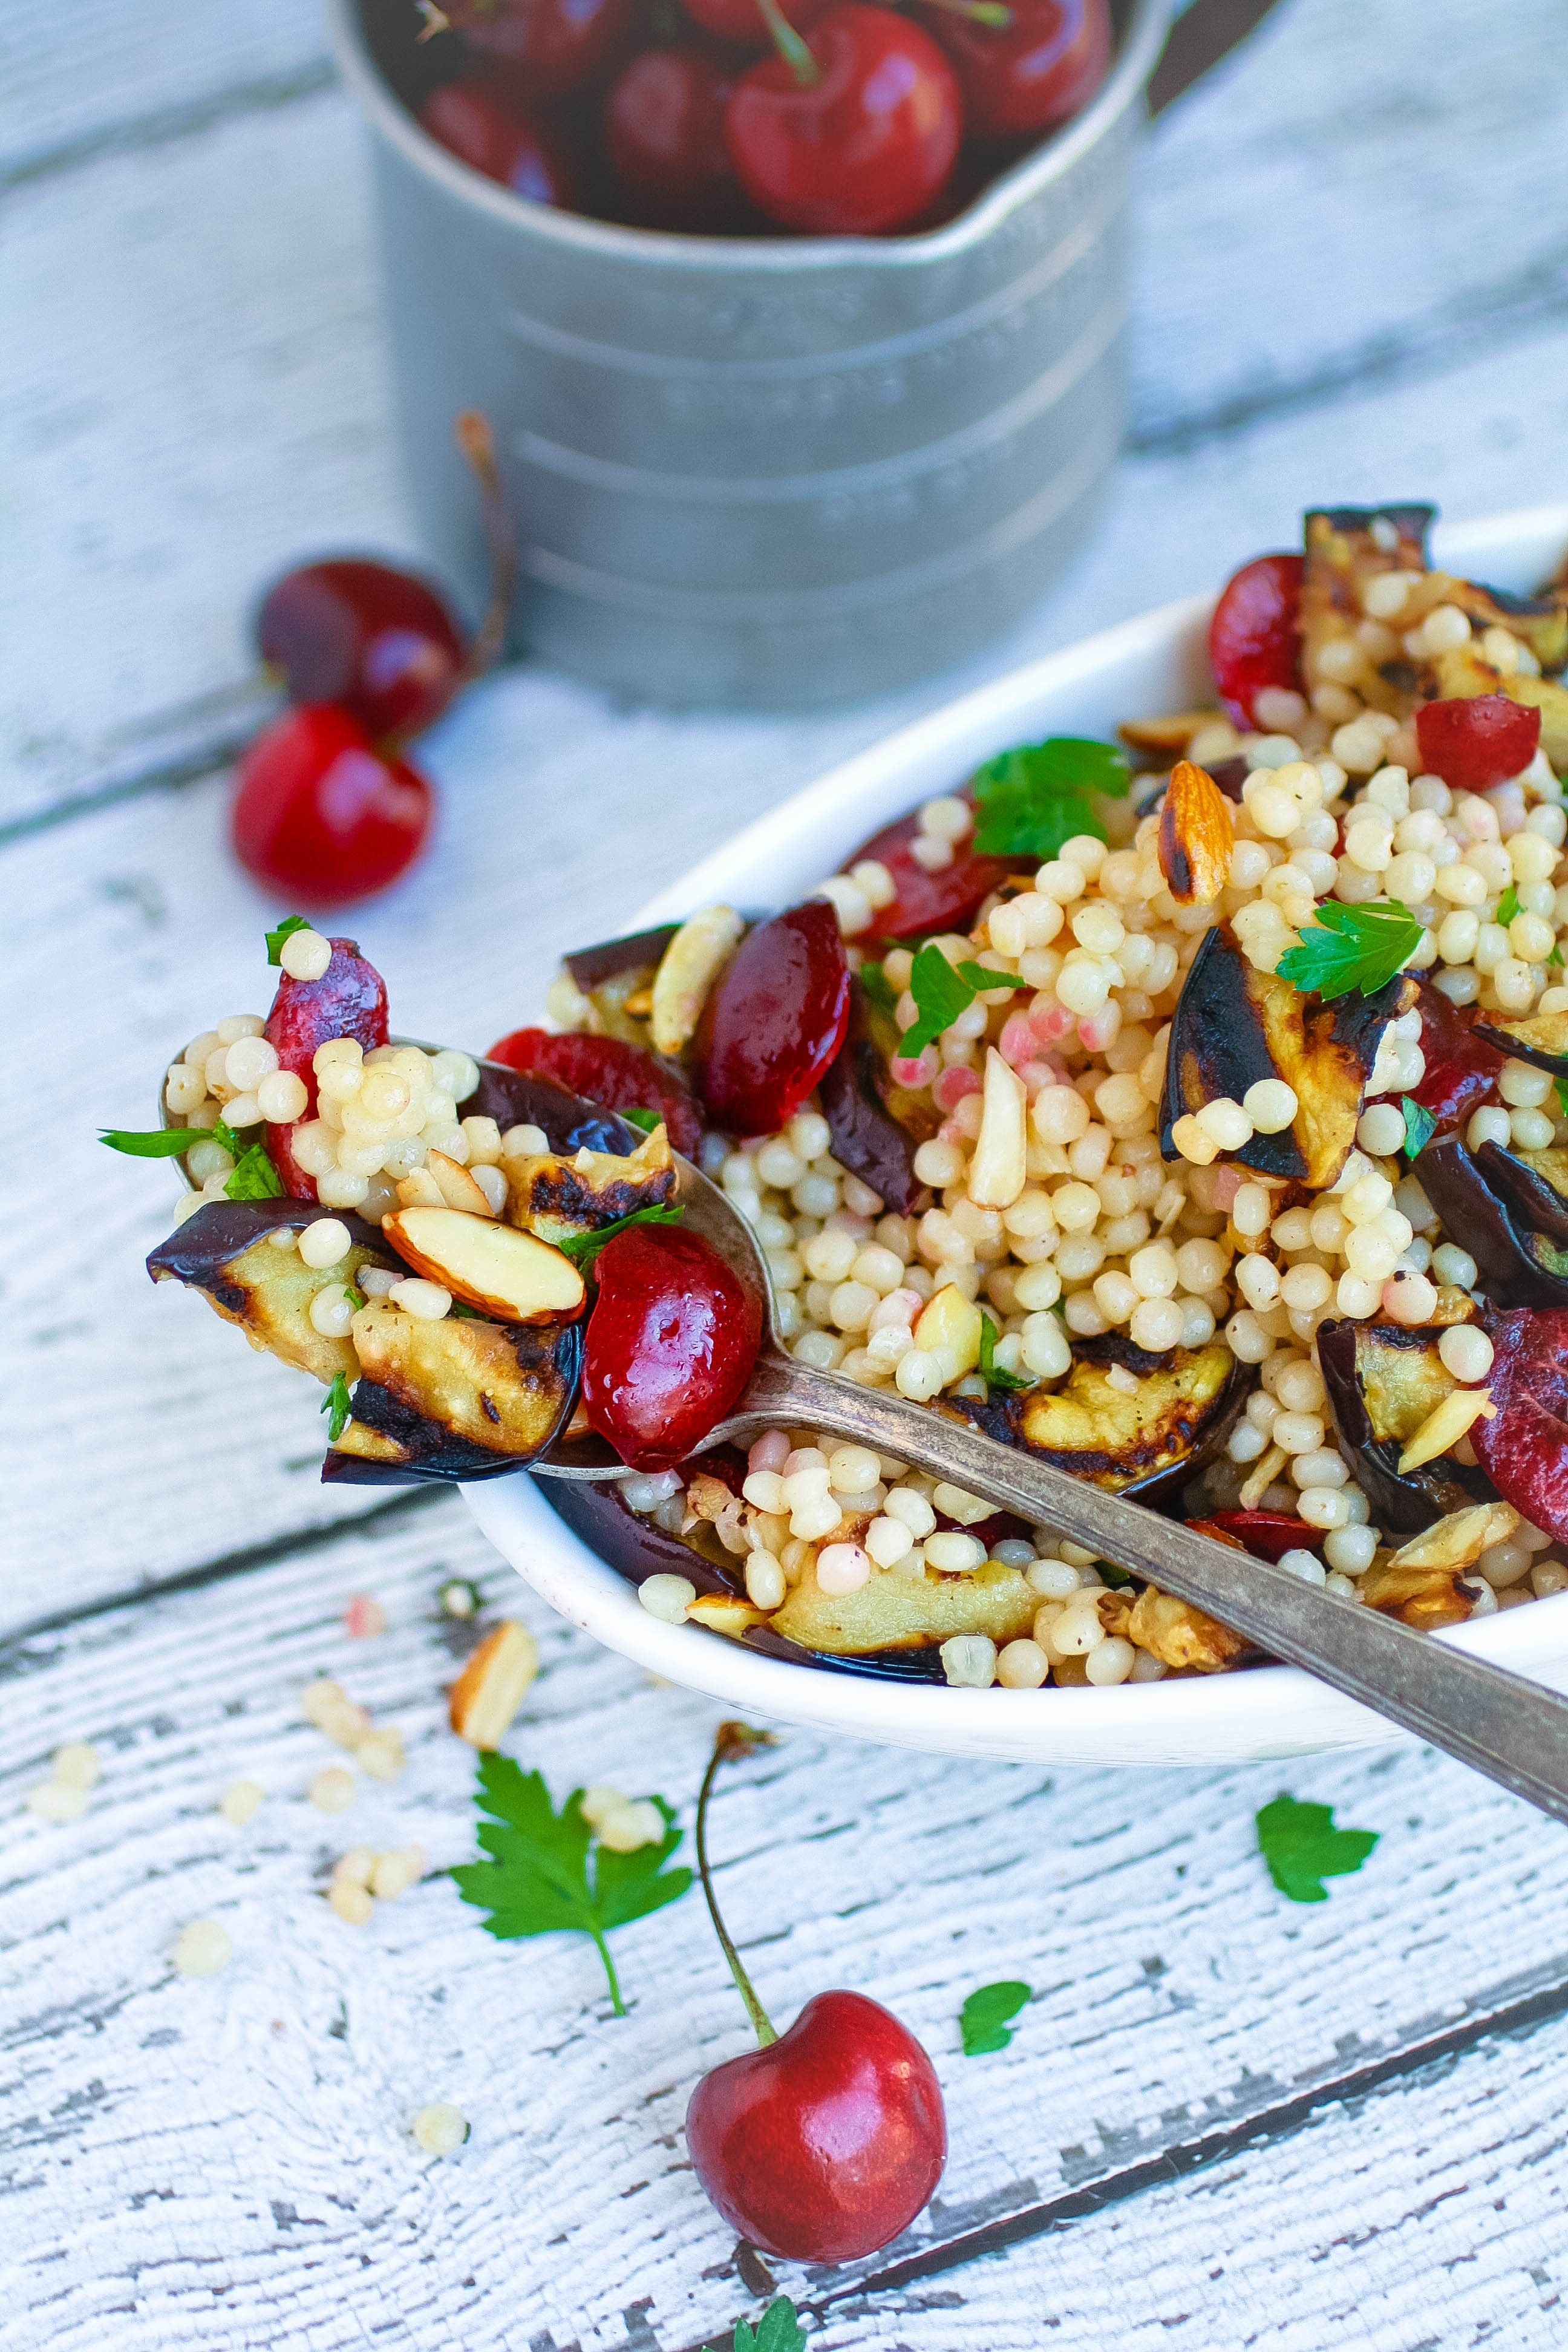 Grilled Eggplant, Cherries, and Couscous Salad is a delightful dish that you'll enjoy all season. Grilled Eggplant, Cherries, and Couscous Salad combines summer fruit with grilling for an amazing salad!